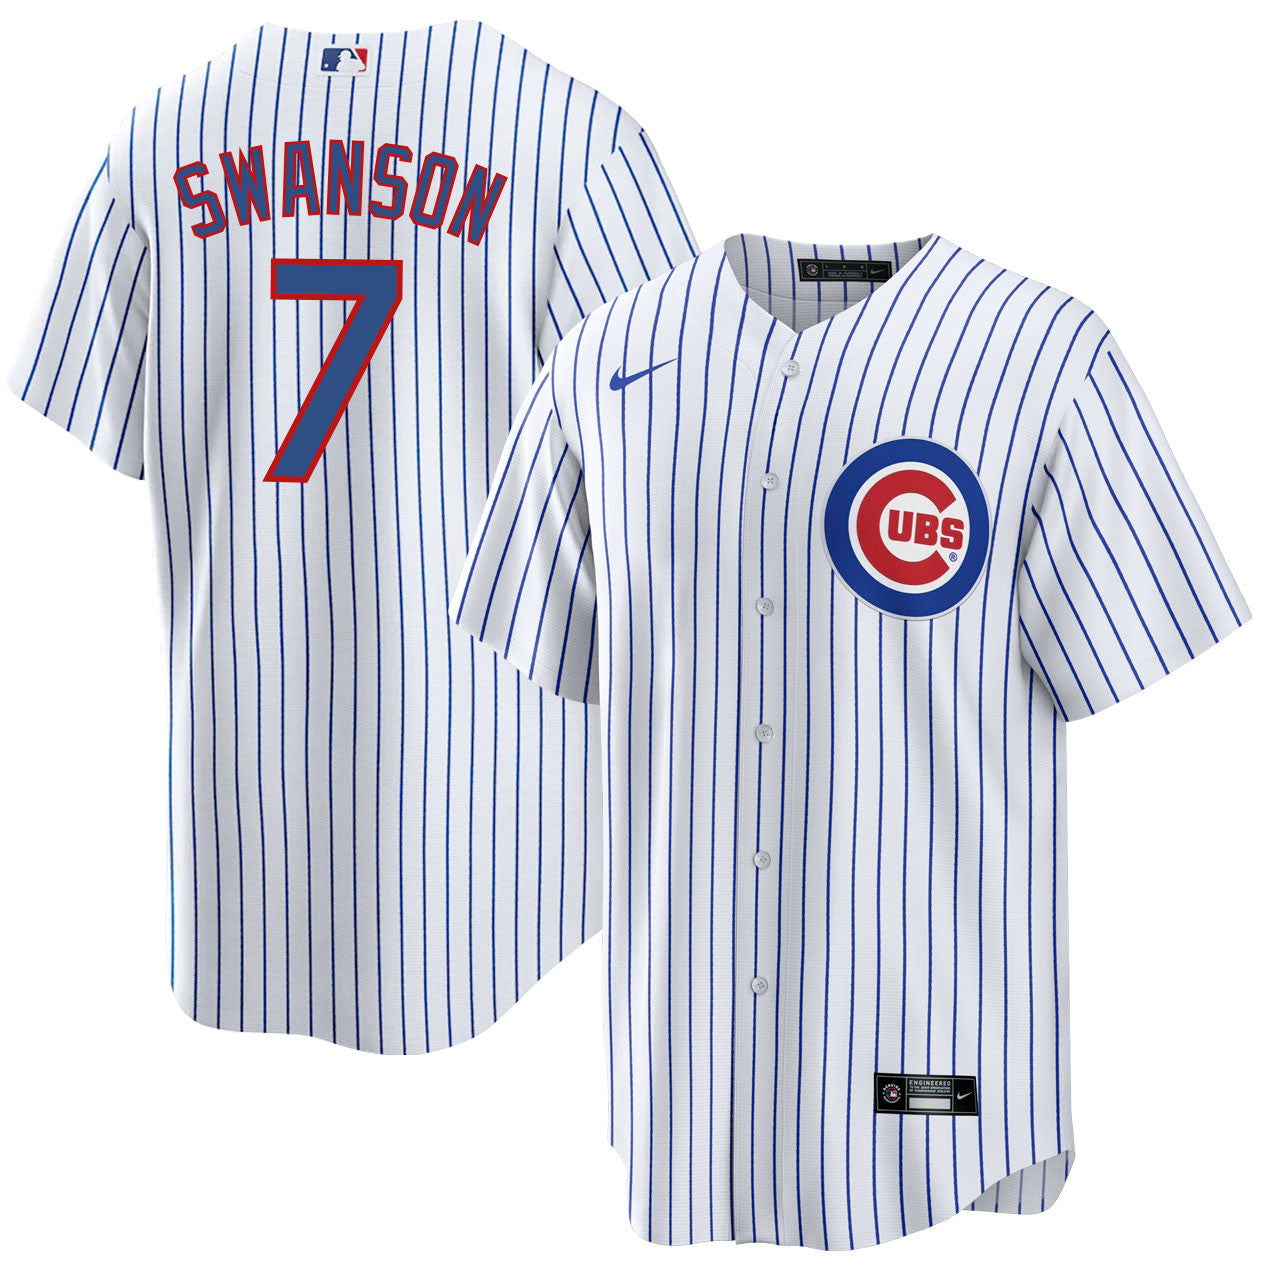 NIKE Youth Dansby Swanson Chicago Cubs White Home Replica Jersey